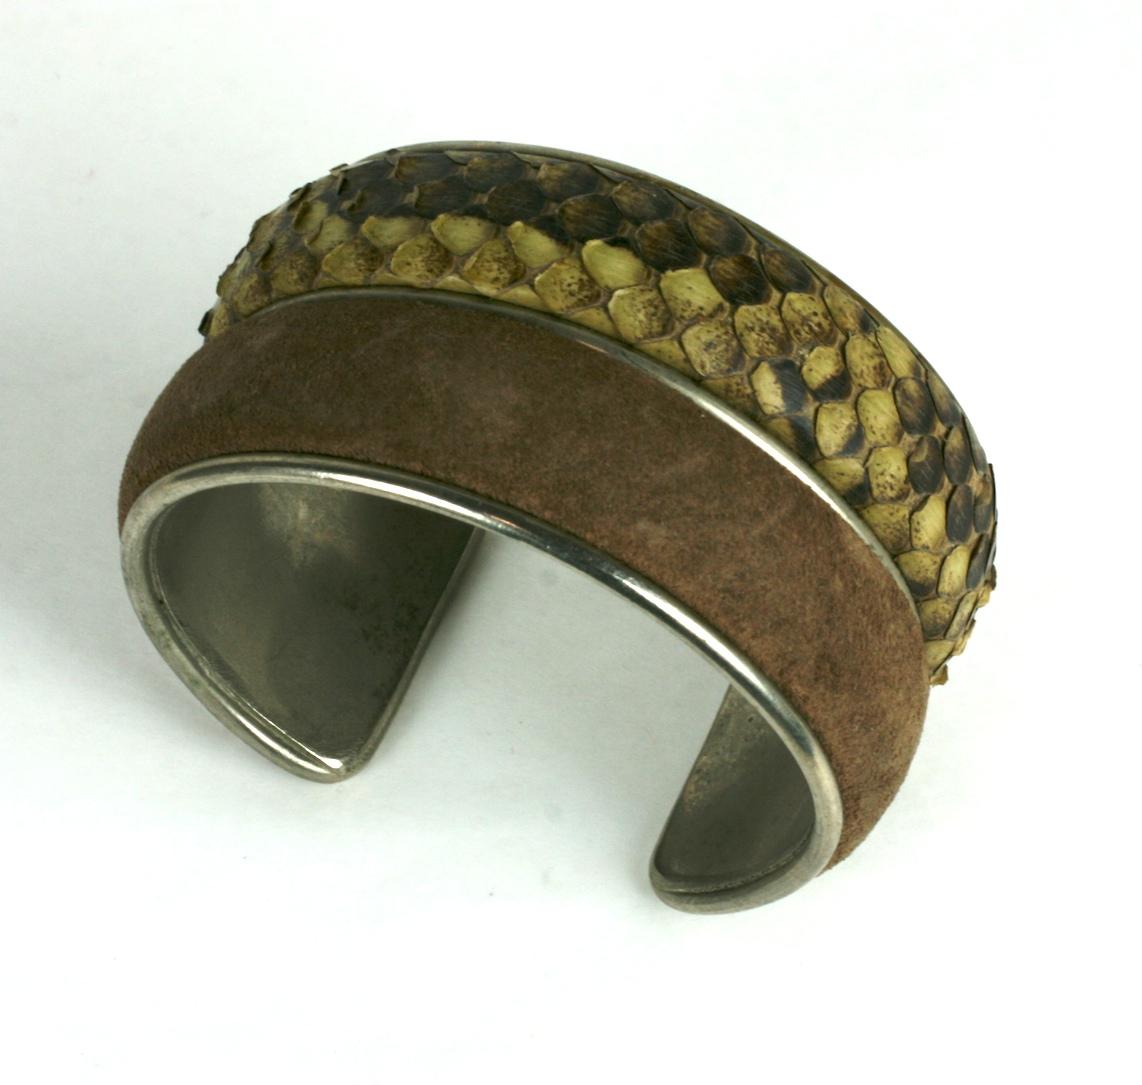 Super Chic Yves Saint Laurent Haute Couture 1980 Cuff Bracelet. Of darkened silver plated bronze, padded snakeskin and chestnut suede. 2 different textures beautifully underlaid with padding so each is dimensional. These are the small unseen details